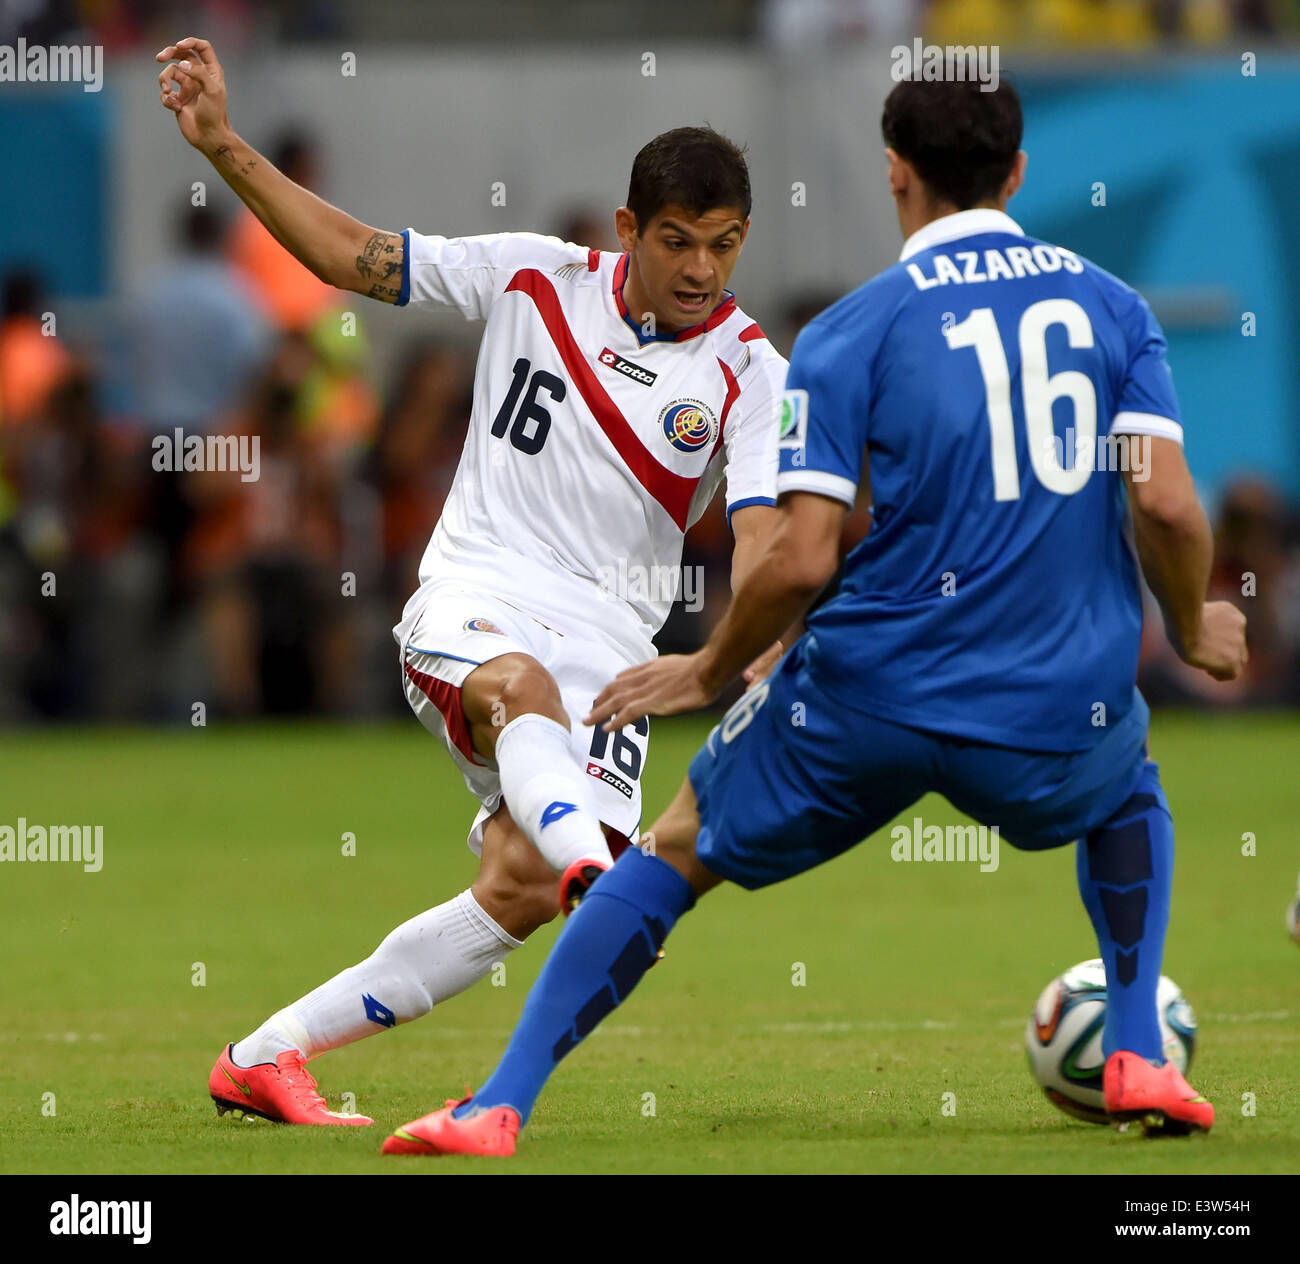 (140629) -- RECIFE, June 29, 2014 (Xinhua) -- Costa Rica's Christian Gamboa vies with Greece's Lazaros Christodoulopoulos during a Round of 16 match between Costa Rica and Greece of 2014 FIFA World Cup at the Arena Pernambuco Stadium in Recife, Brazil, on June 29, 2014.(Xinhua/Guo Yong)(rh) Stock Photo